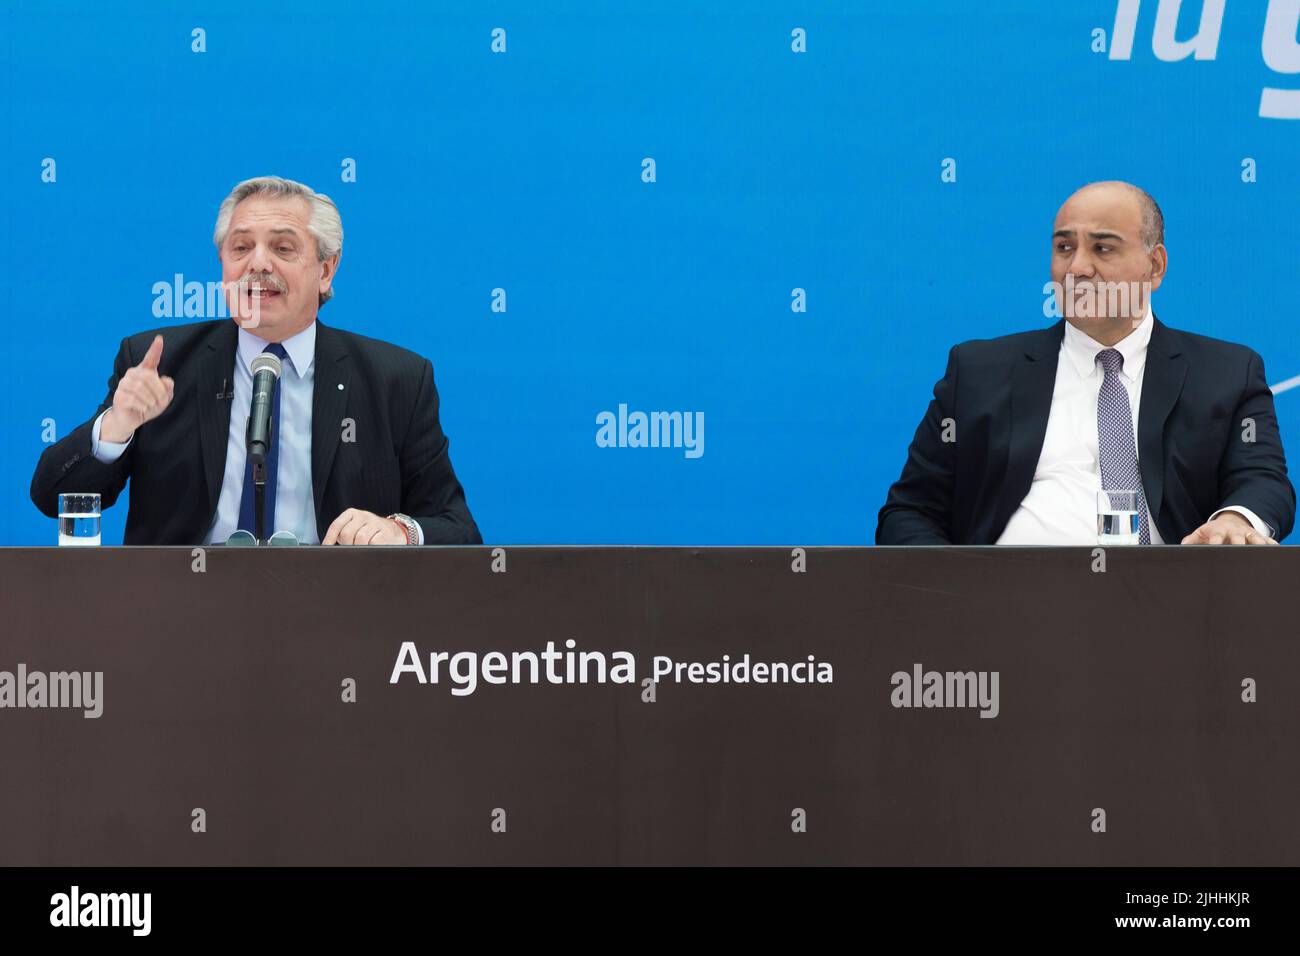 Buenos Aires, Argentina. 18th July, 2022. President Alberto Fernández led the presentation of Argentina Grande, Infrastructure Plan for the Development of the Nation, together with the Chief of the Cabinet of Ministers Juan Manzur. (Photo by Esteban Osorio/Pacific Press) Credit: Pacific Press Media Production Corp./Alamy Live News Stock Photo